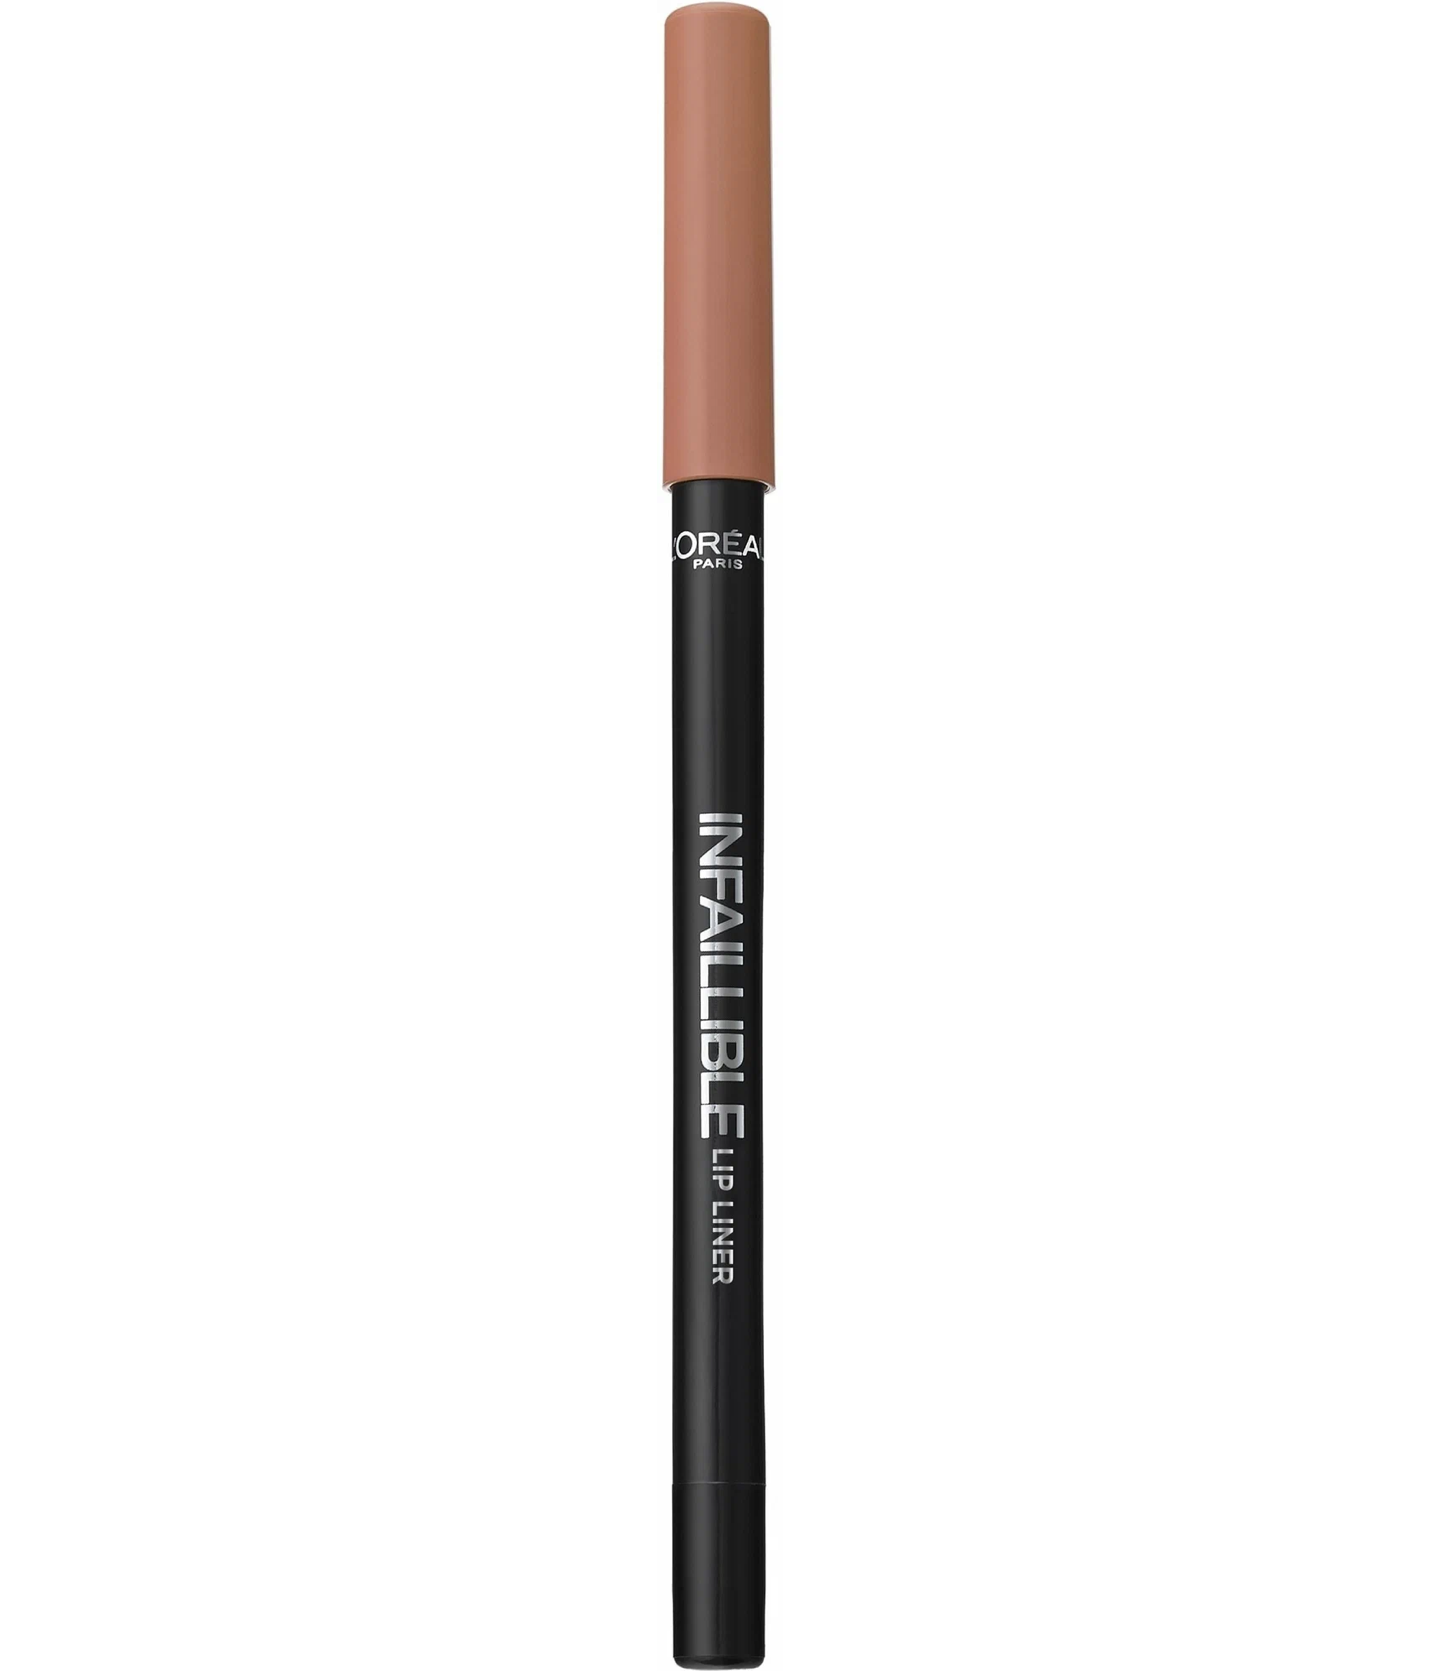    / L'Oreal Paris -    Infaillible longwear  101 Gone with the Nude 7 